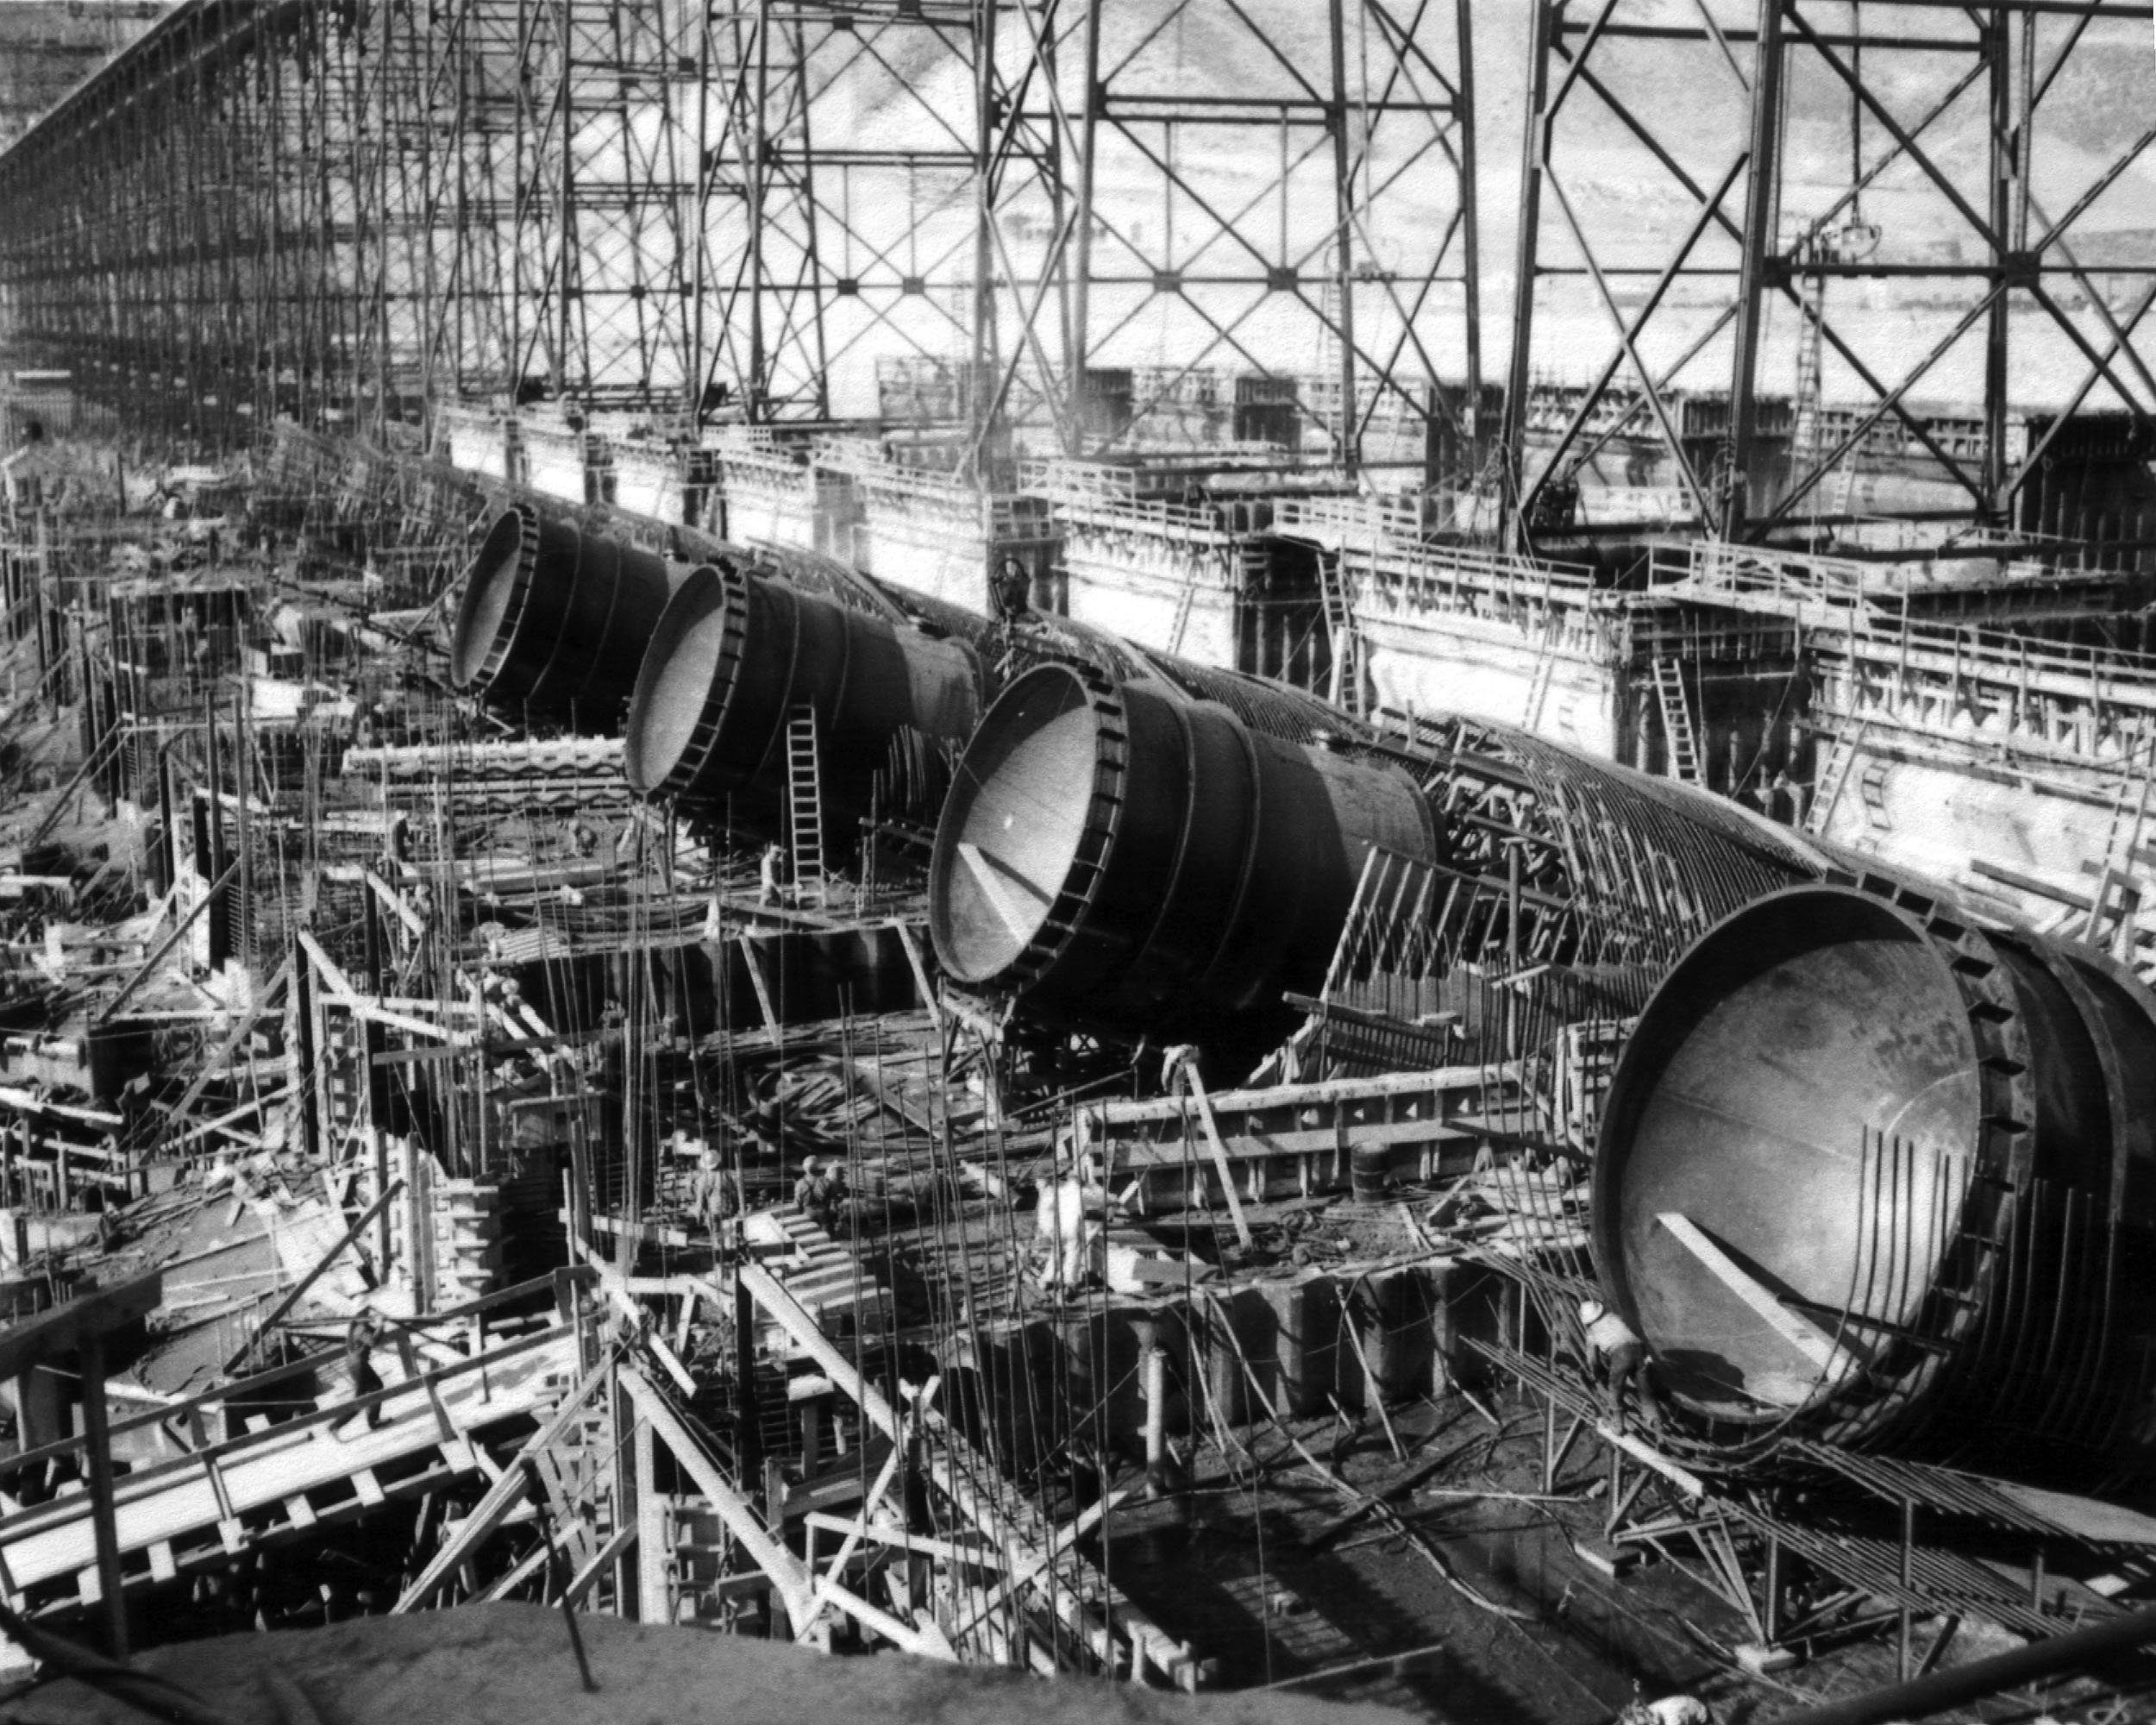 November 26, 1938. The first 18 foot diameter penstock liner sections at Grand Coulee Dam.